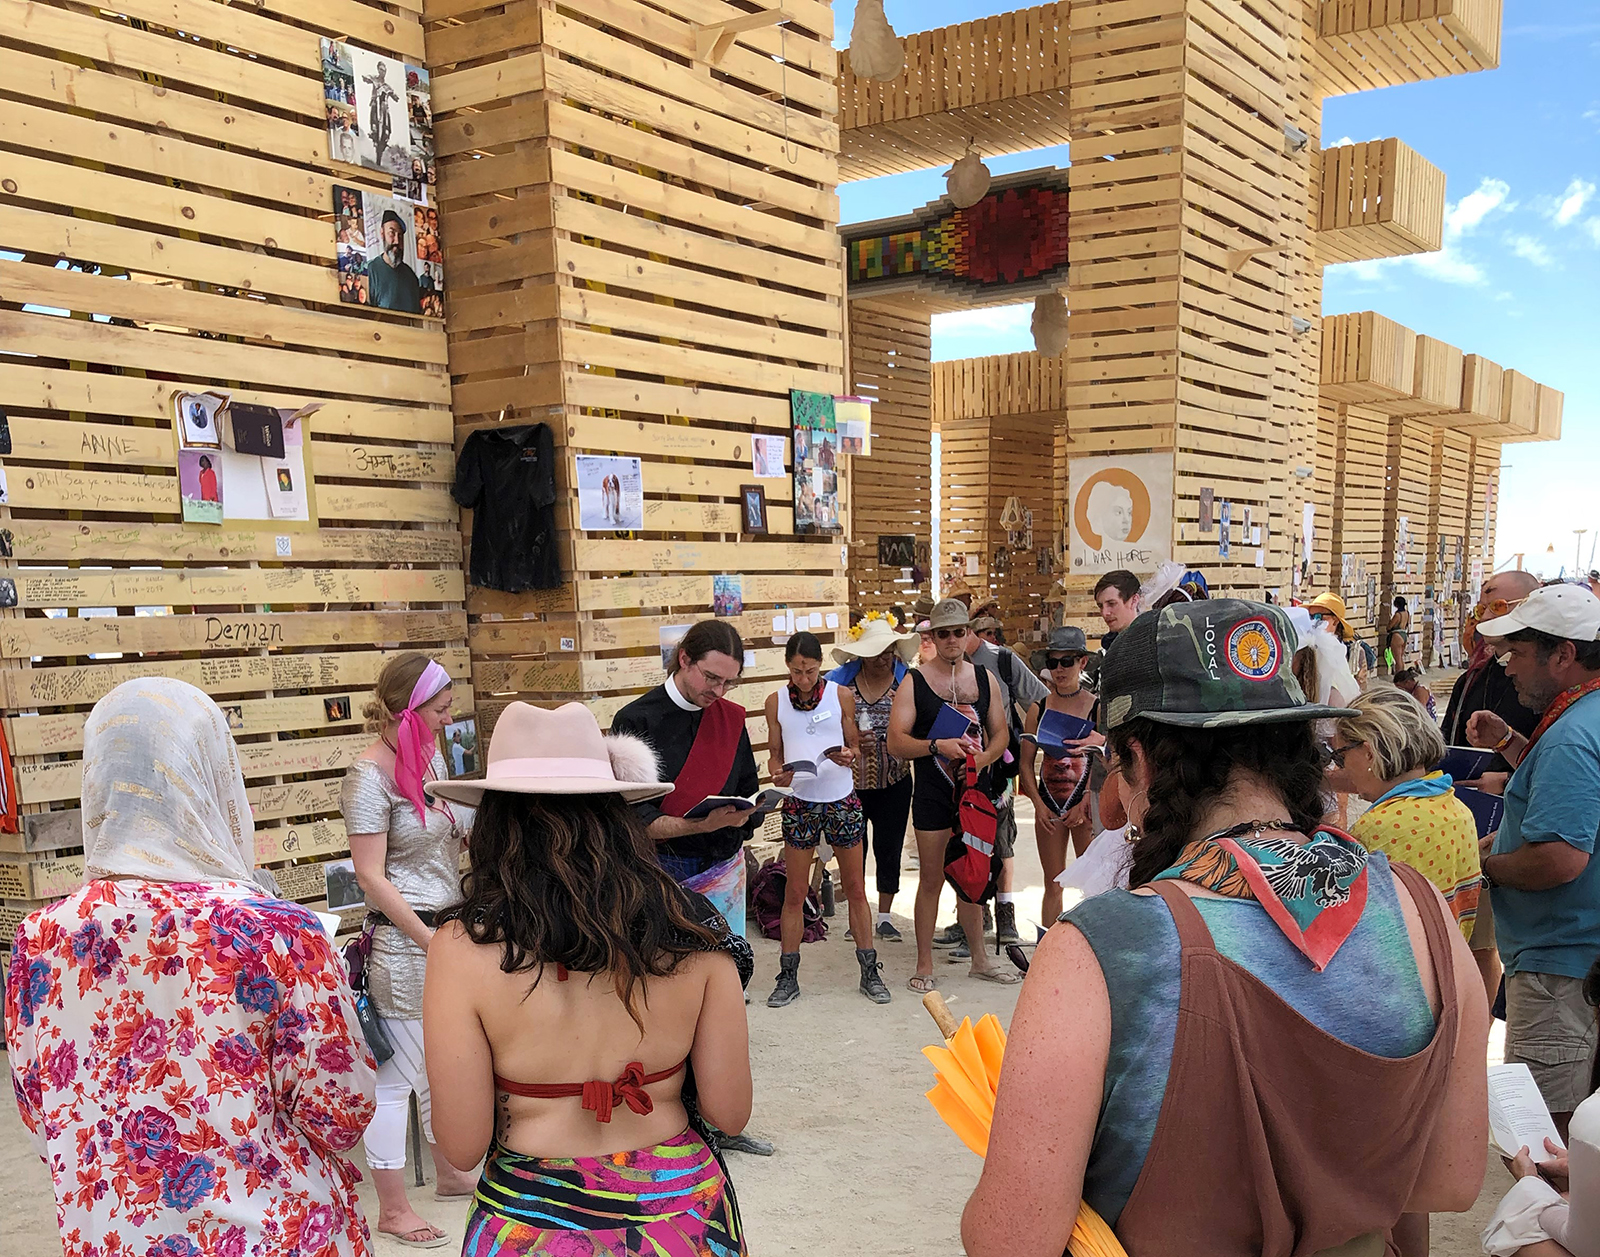 Religious AF camp members and visitors hold an Ash Wednesday service at the Temple during Burning Man 2019 in Black Rock City, Nevada. Photo by Alex Leach